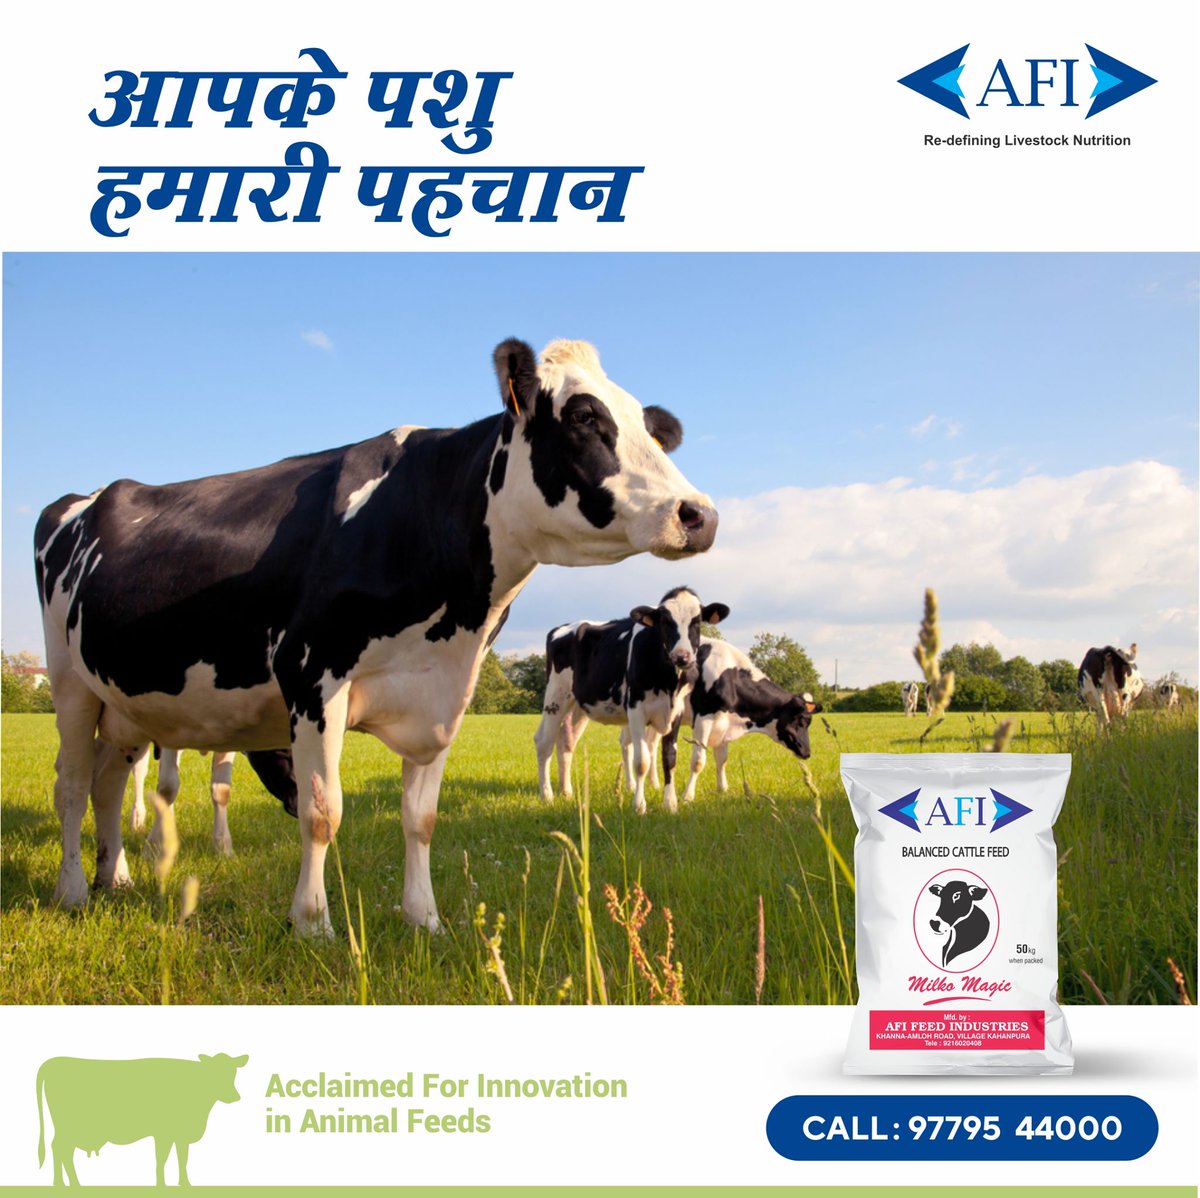 AFI Feeds feel proud when your livestock is healthy and your production is high. Choose Balanced Life, Balanced Diet.
#Dairy #Feed #AnimalFeed #AnimalHealth #MilkProduction #AnimalNutrition #Farming #IndianDairyFarmer #DairyIndustry #DairyFarmer #DairyFarming #Milk #Agriculture